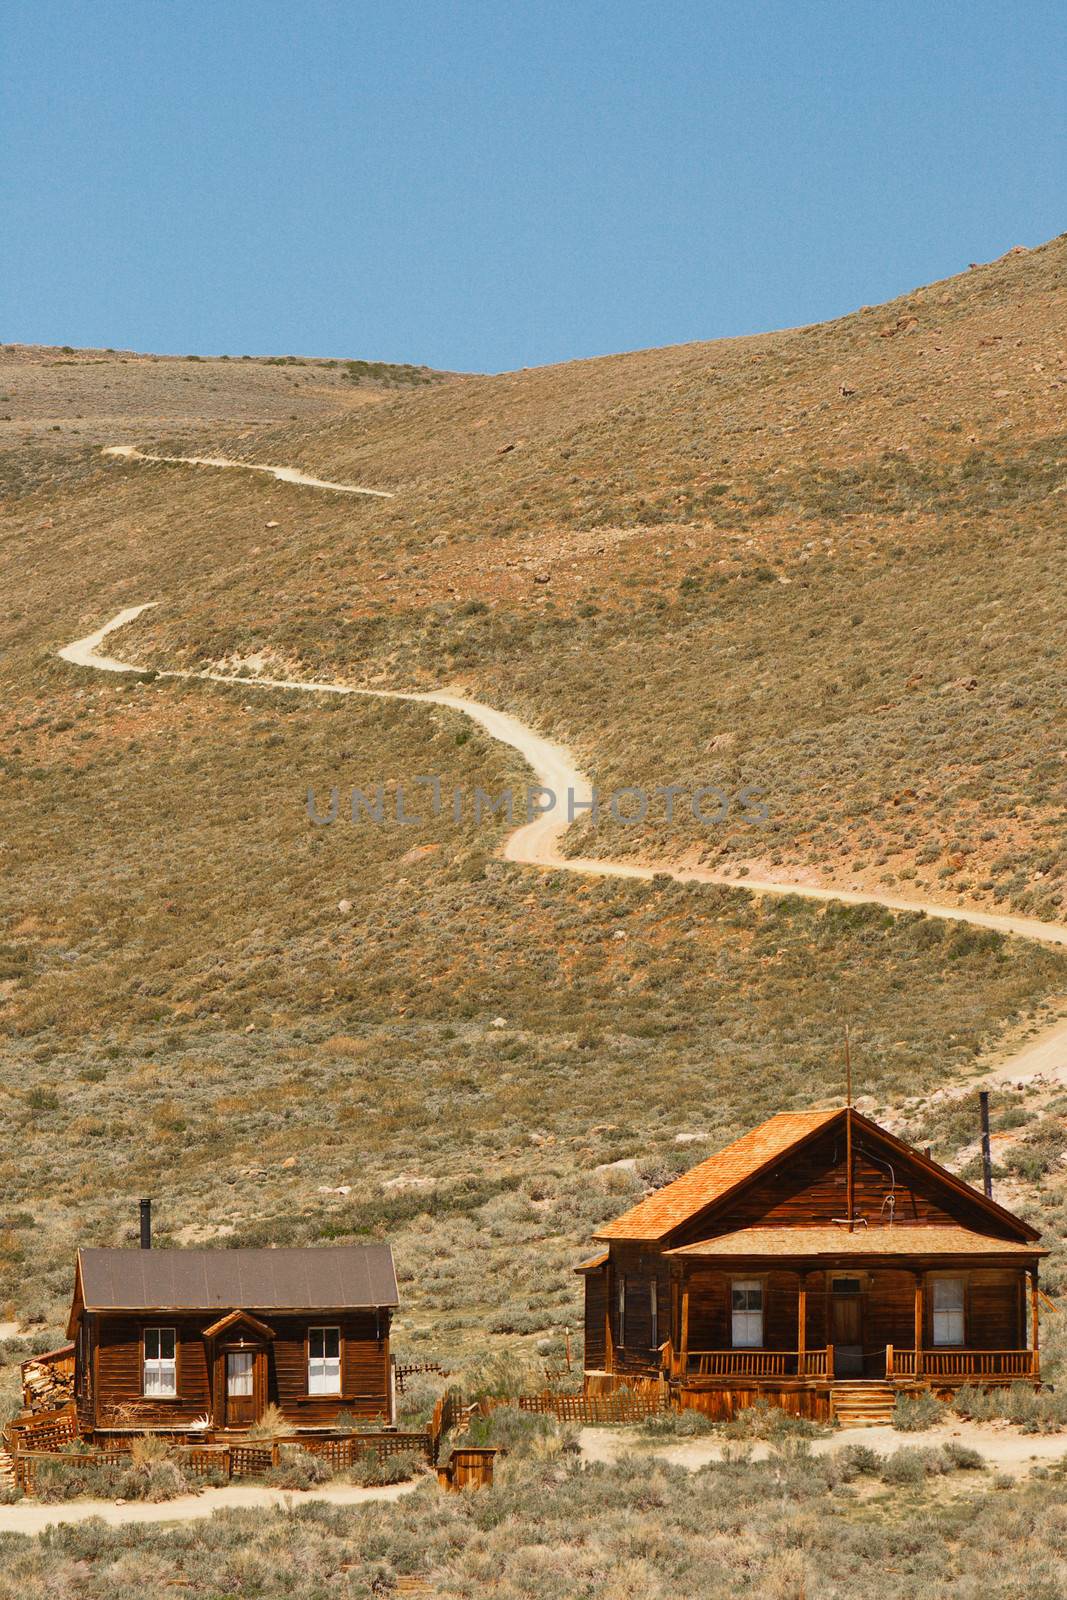 Scenic view of old buildings in Bodie State Historic Park, California, U.S.A.